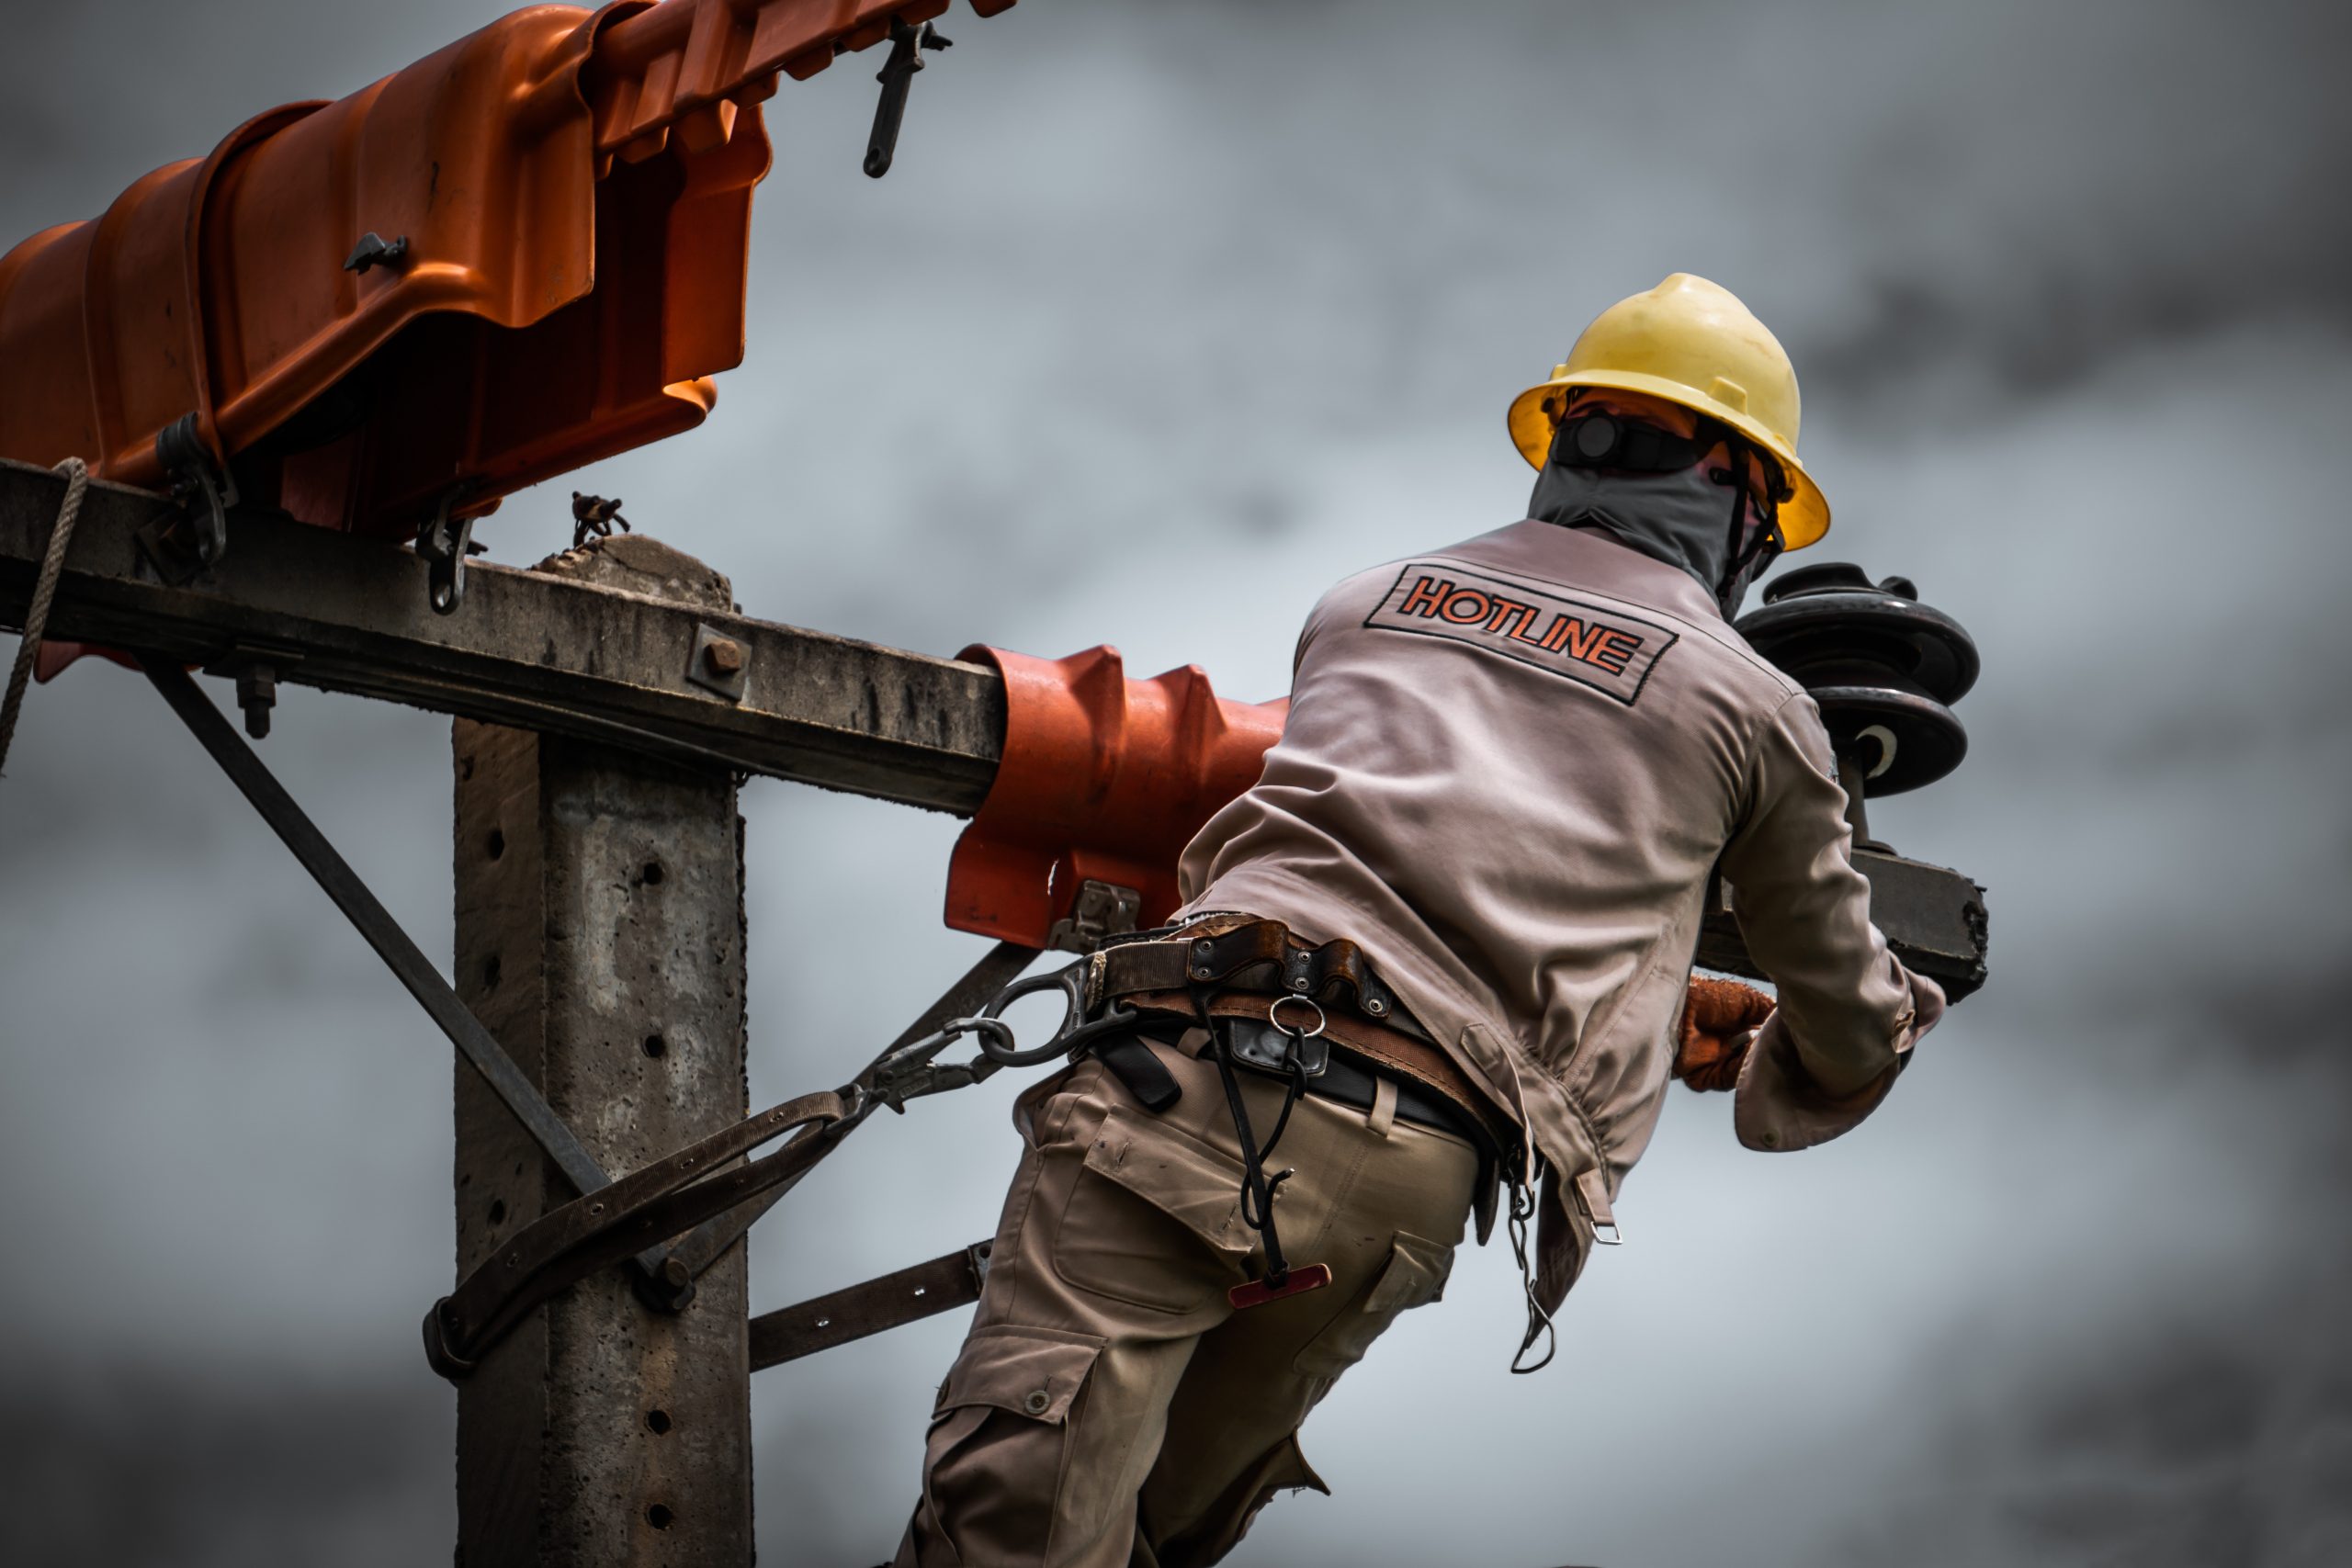 8 Tips For Linemen To Keep Themselves Safe